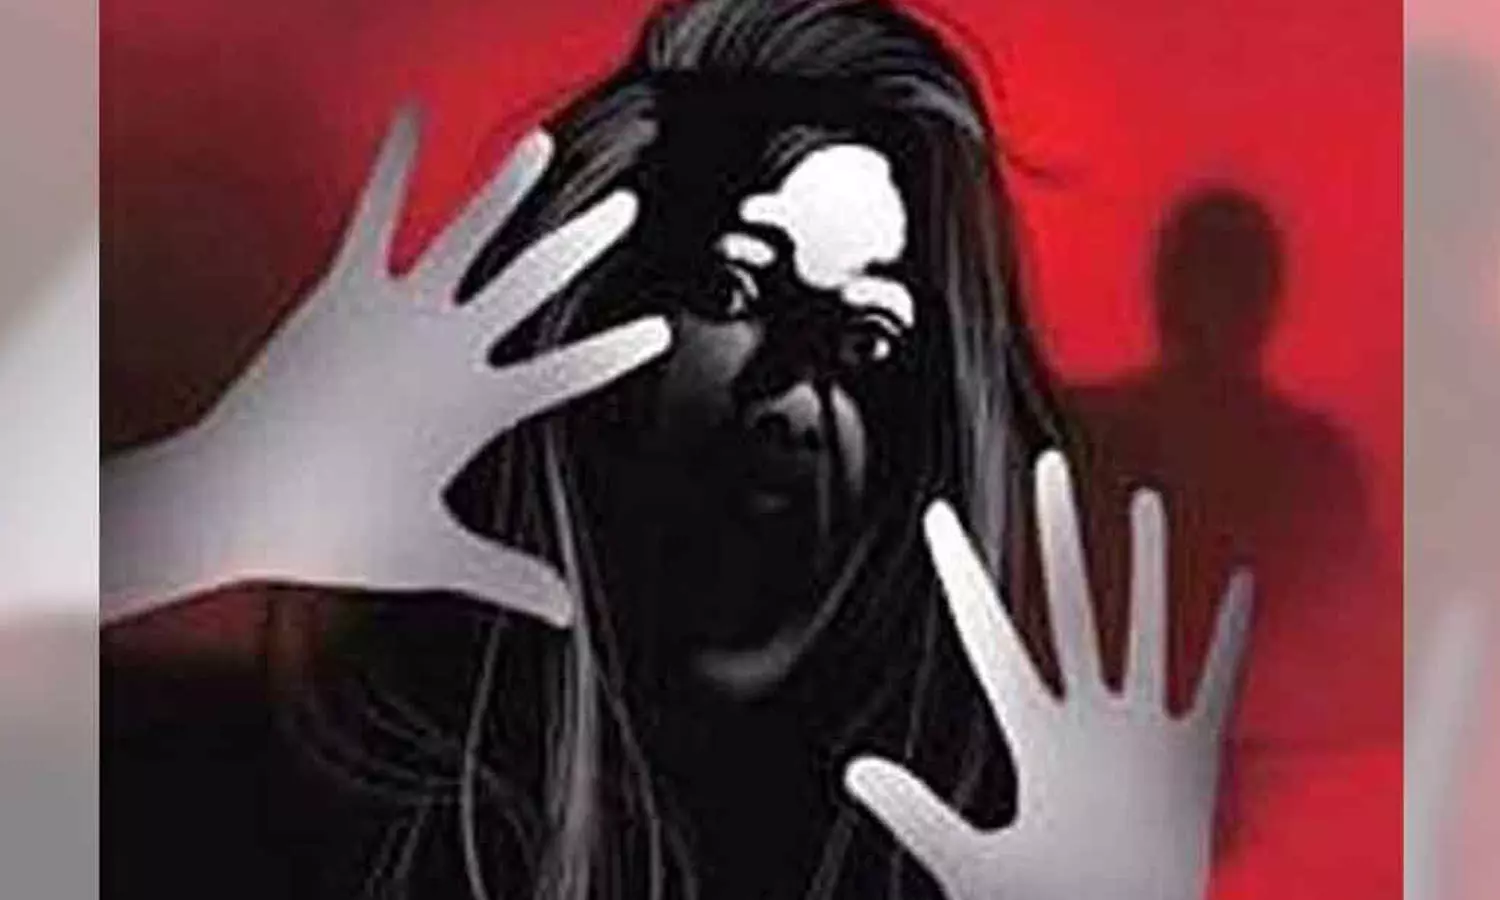 Woman gang-raped in Ongole, police identifies two accused